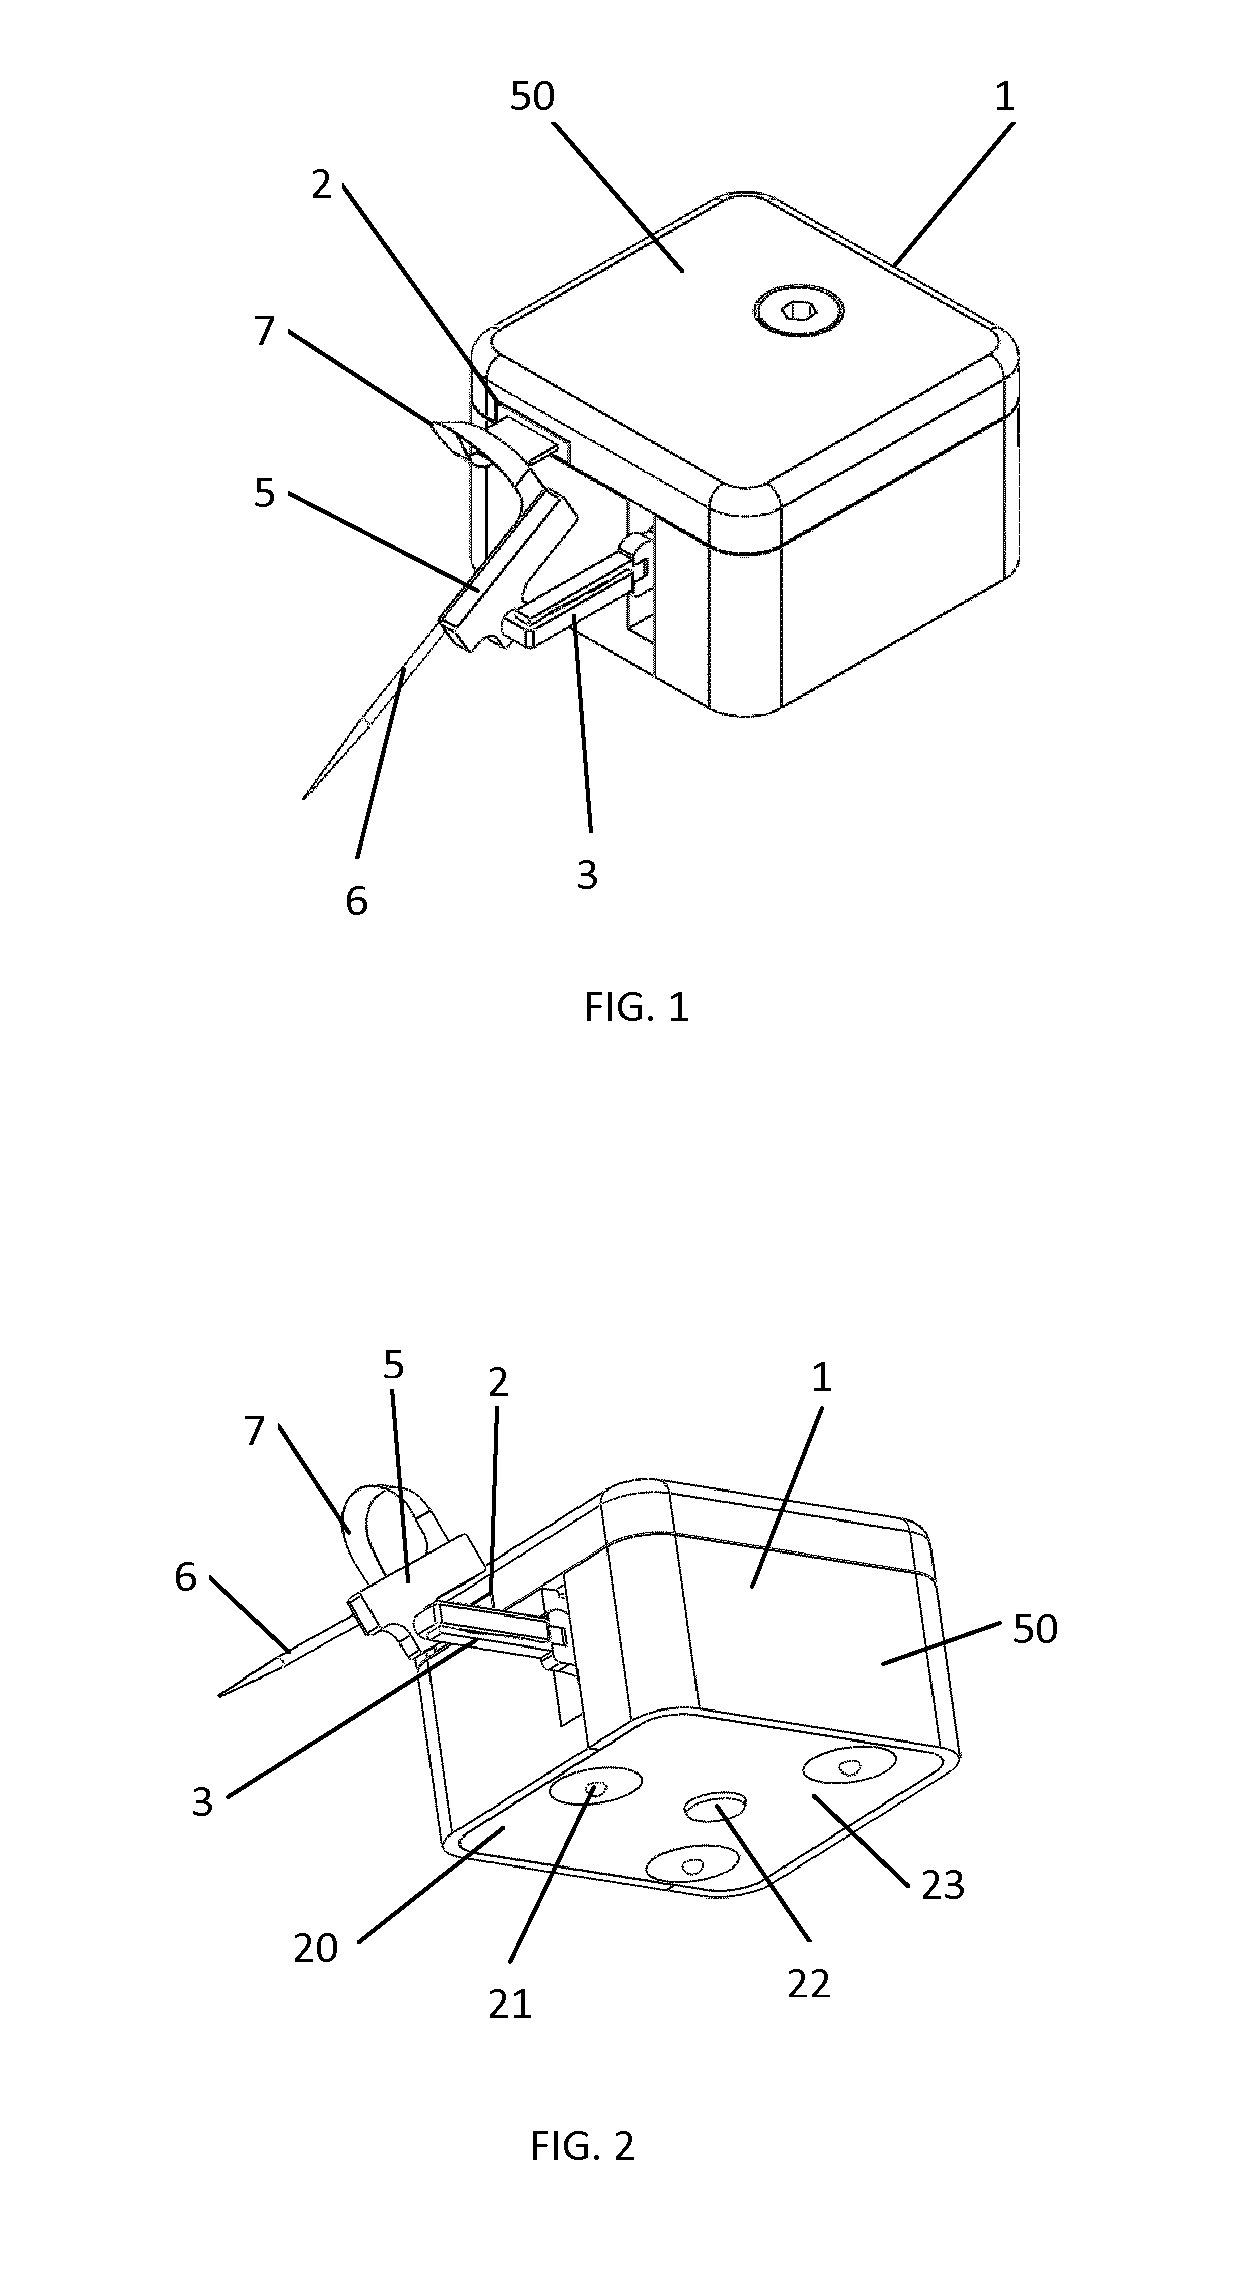 Electromechanical tool holder assembly for mobile manipulation apparatus